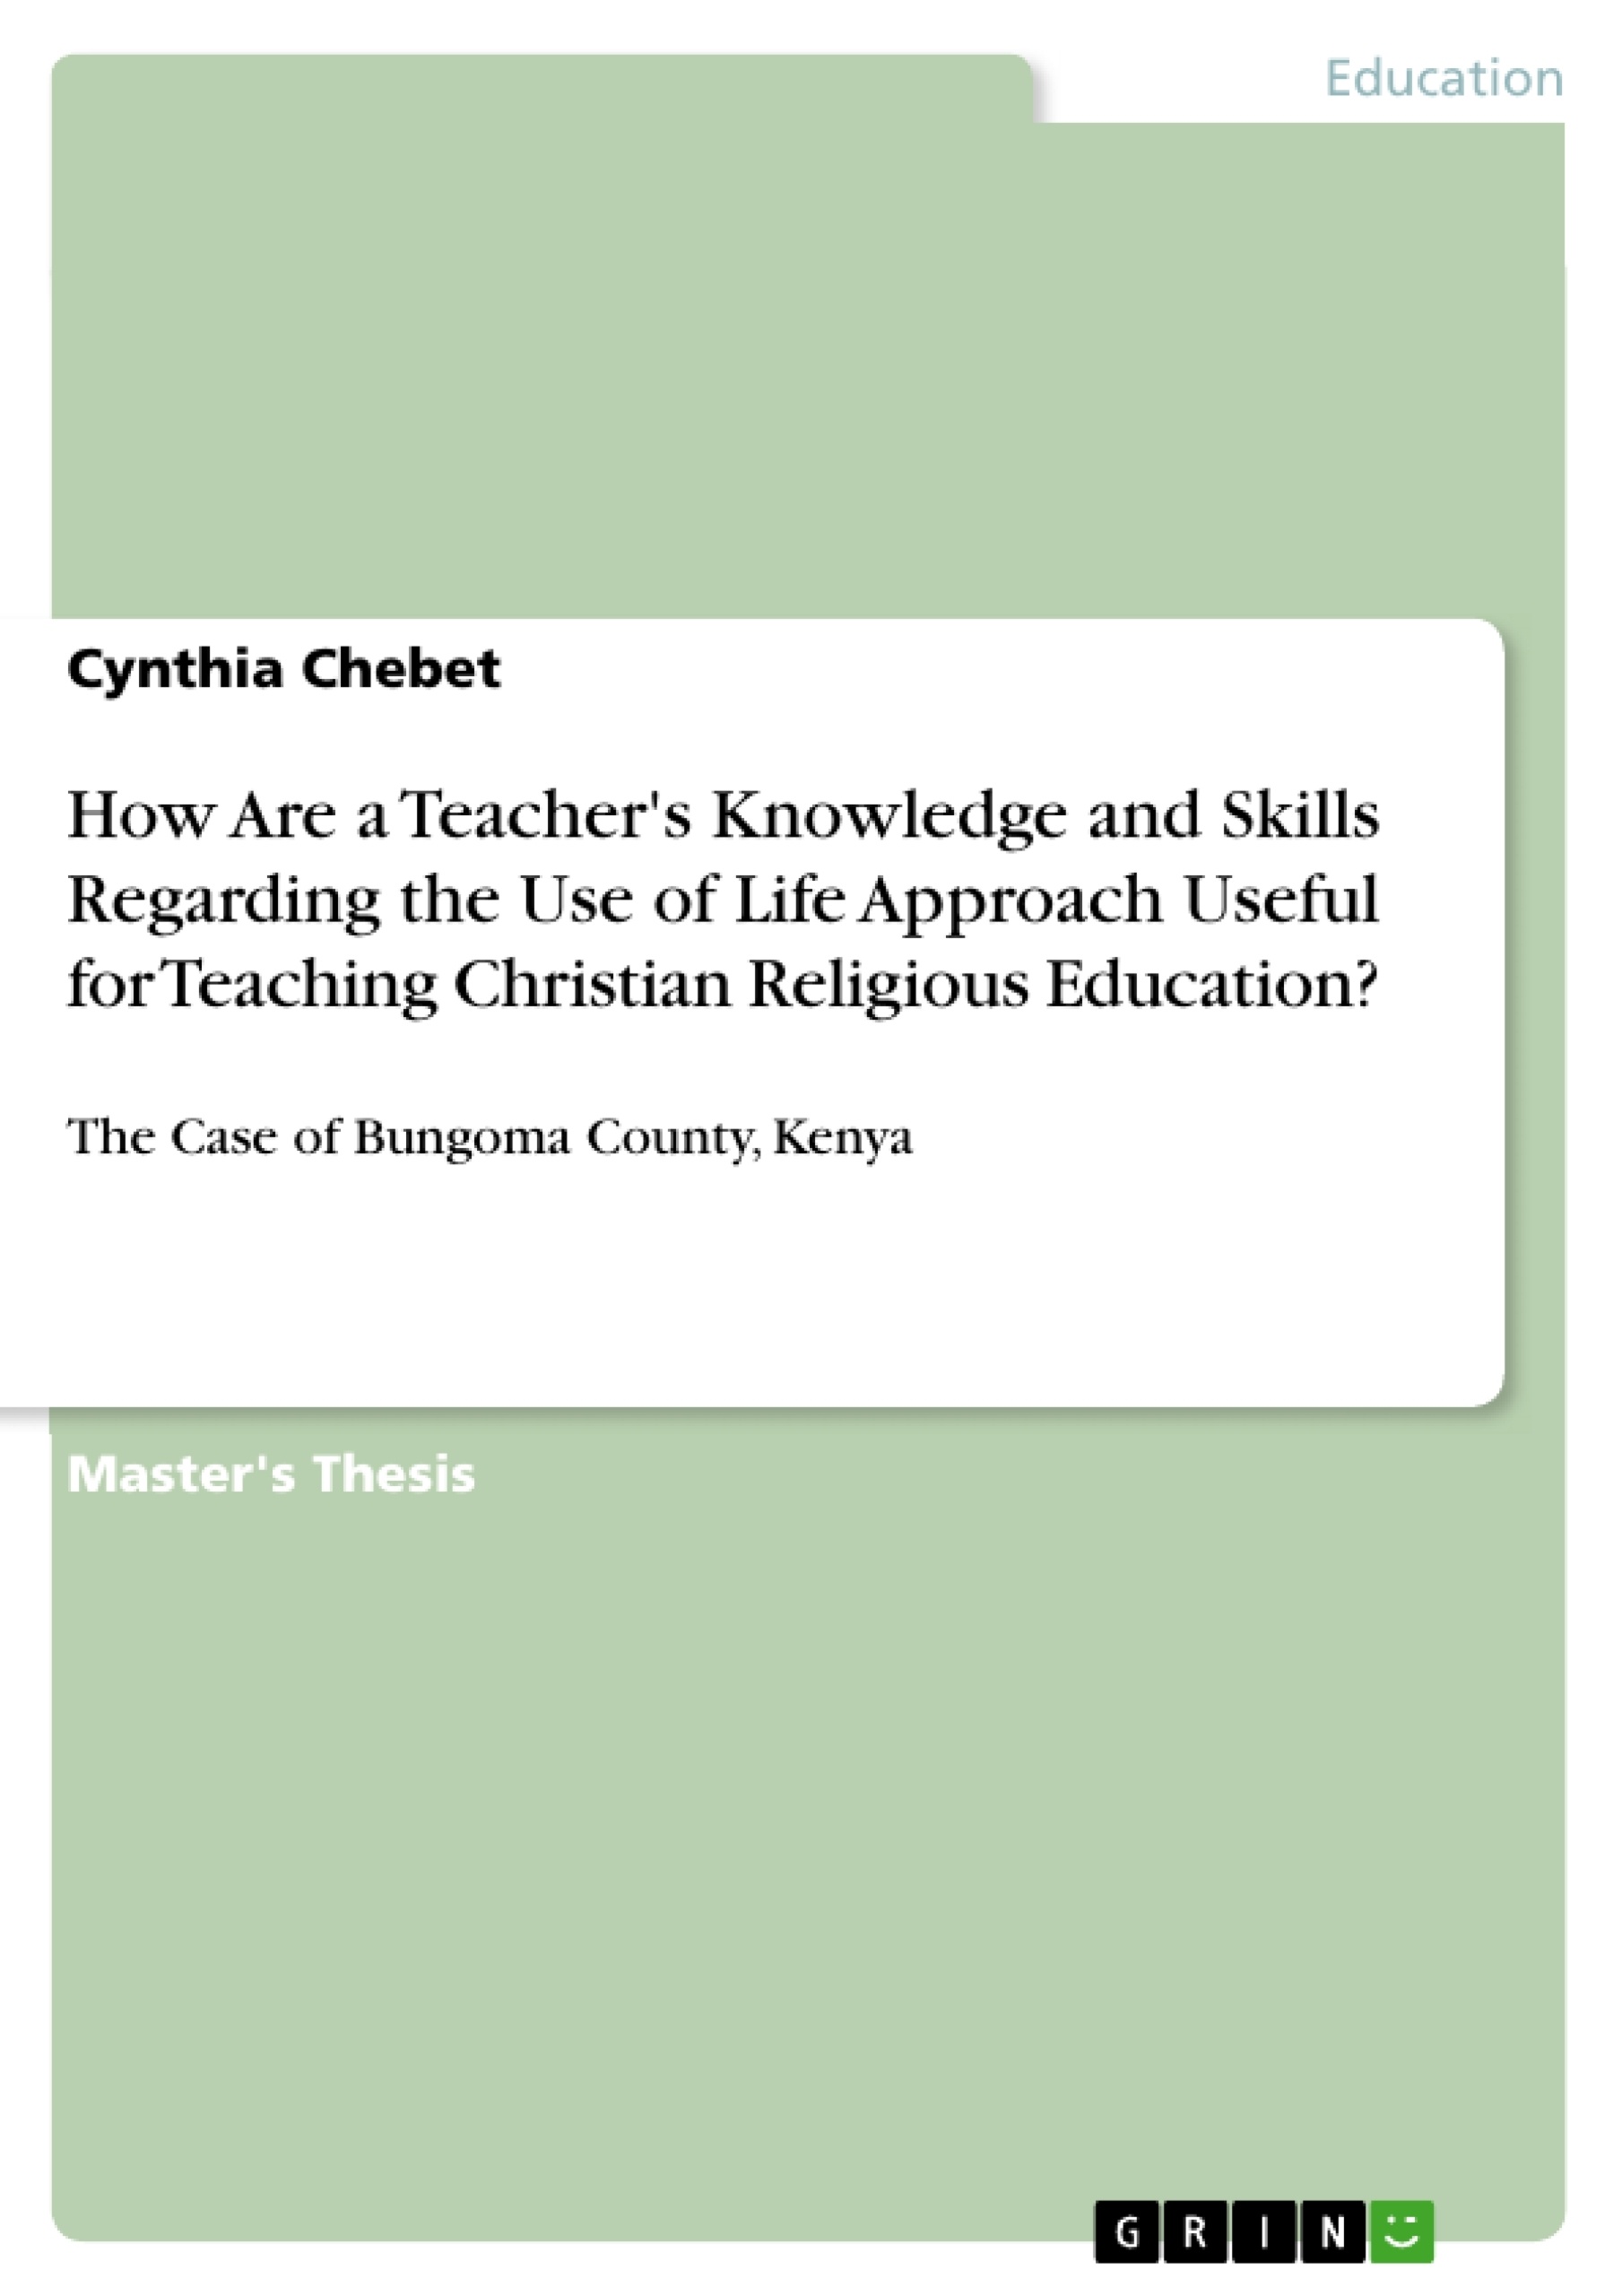 Title: How Are a Teacher's Knowledge and Skills Regarding the Use of Life Approach Useful for Teaching Christian Religious Education?